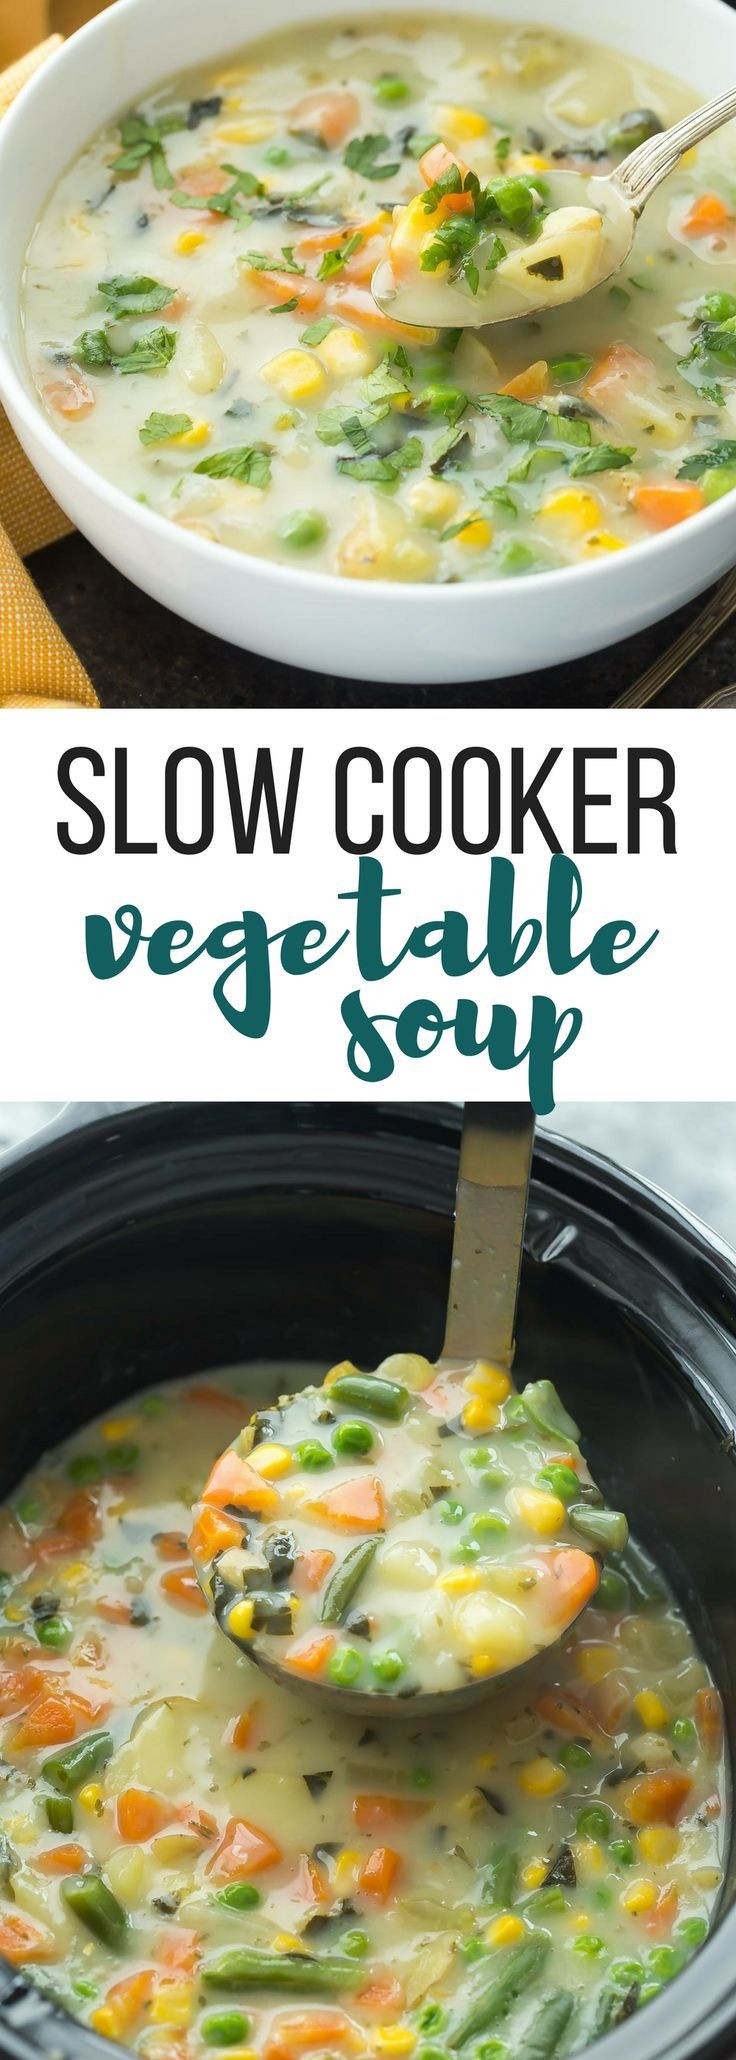 Healthy Crockpot Soups
 This Slow Cooker Creamy Ve able Soup is a hearty